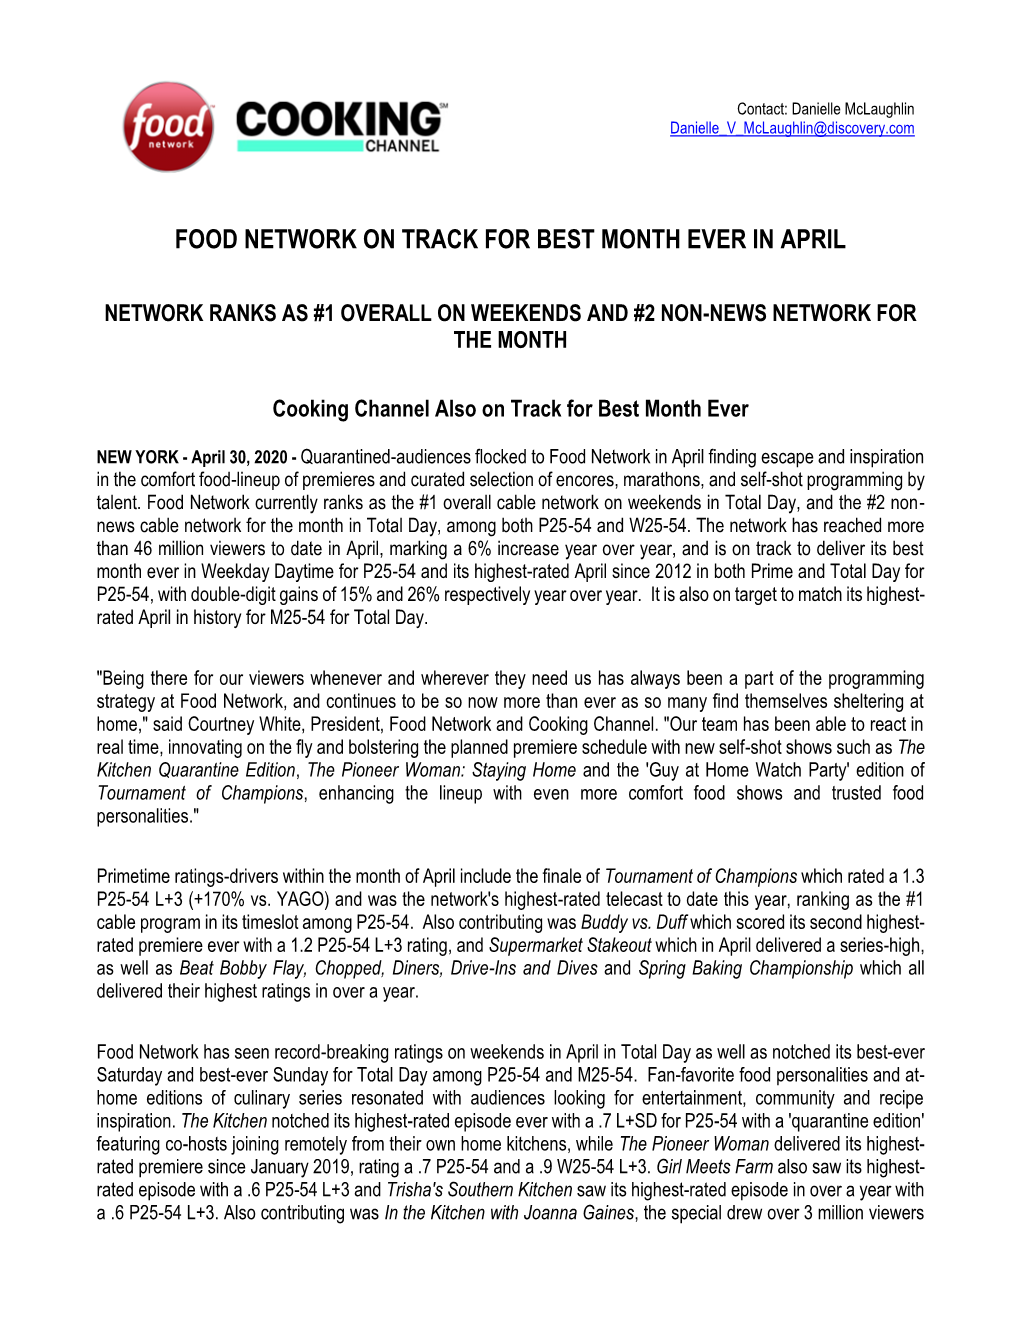 Food Network on Track for Best Month Ever in April